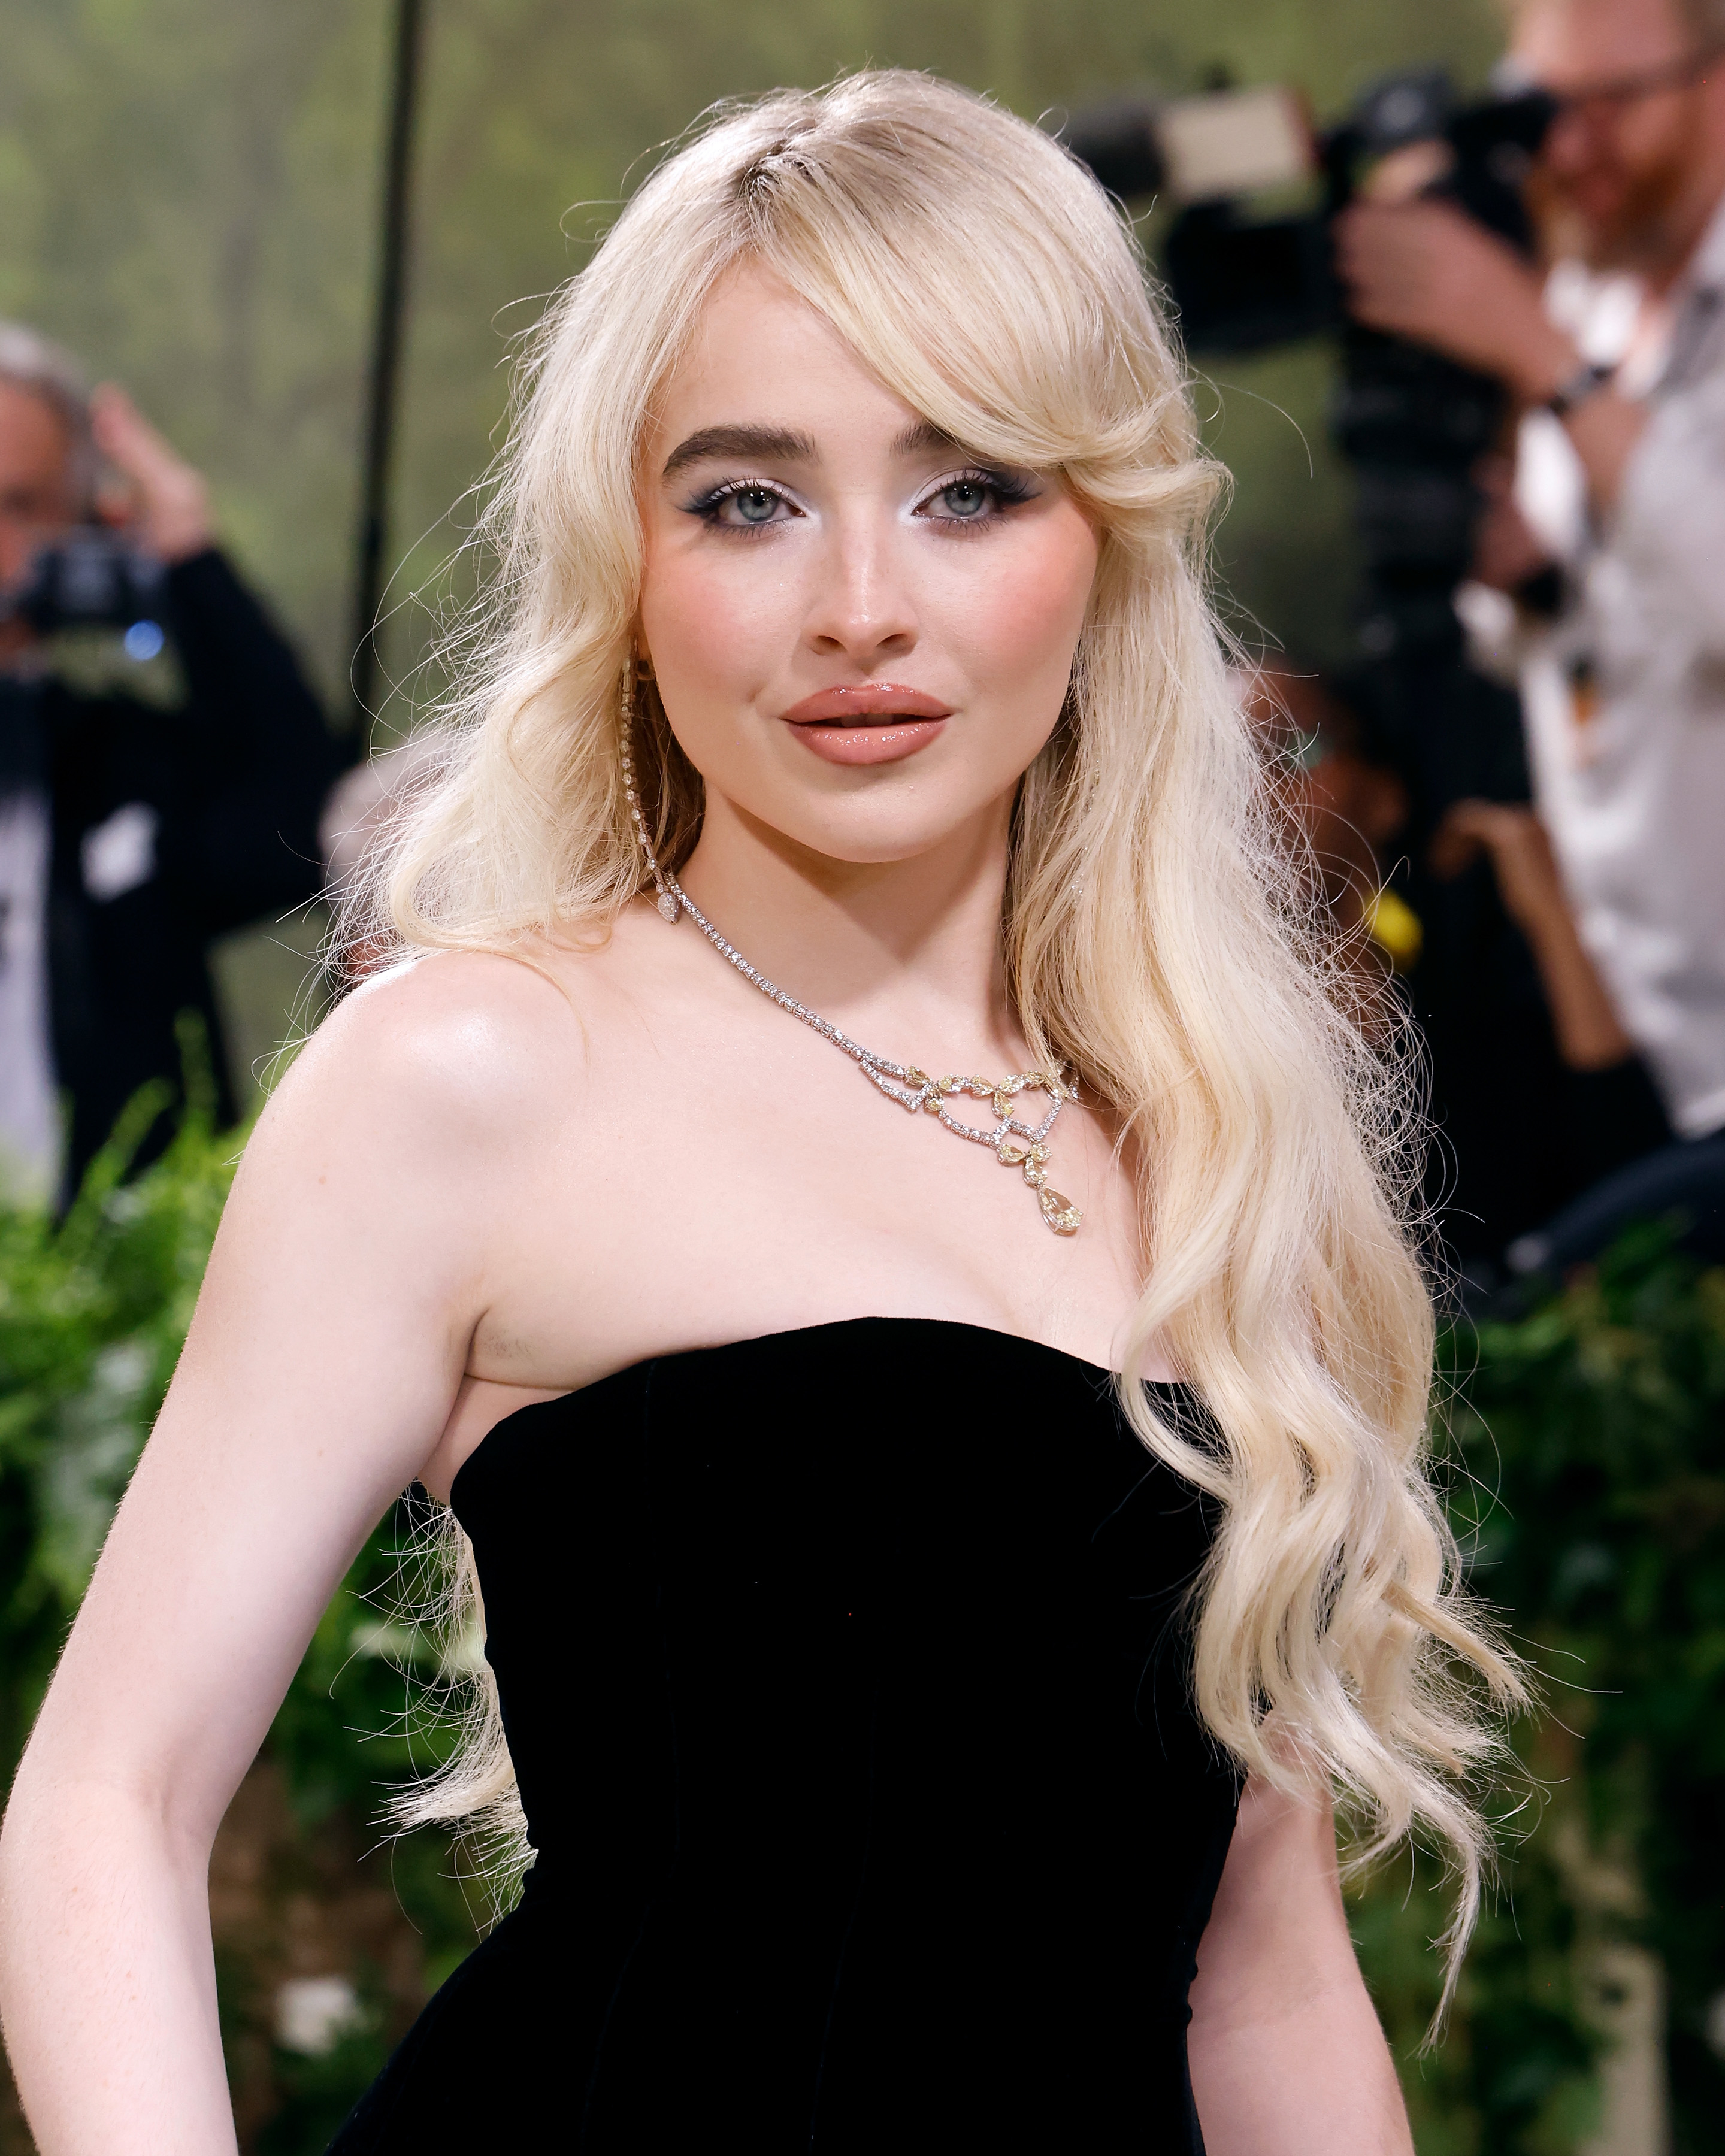 Sabrina Carpenter poses on the red carpet in a strapless, fitted dress, with wavy long hair, accessorized with a necklace and light makeup. Photographers are in the background